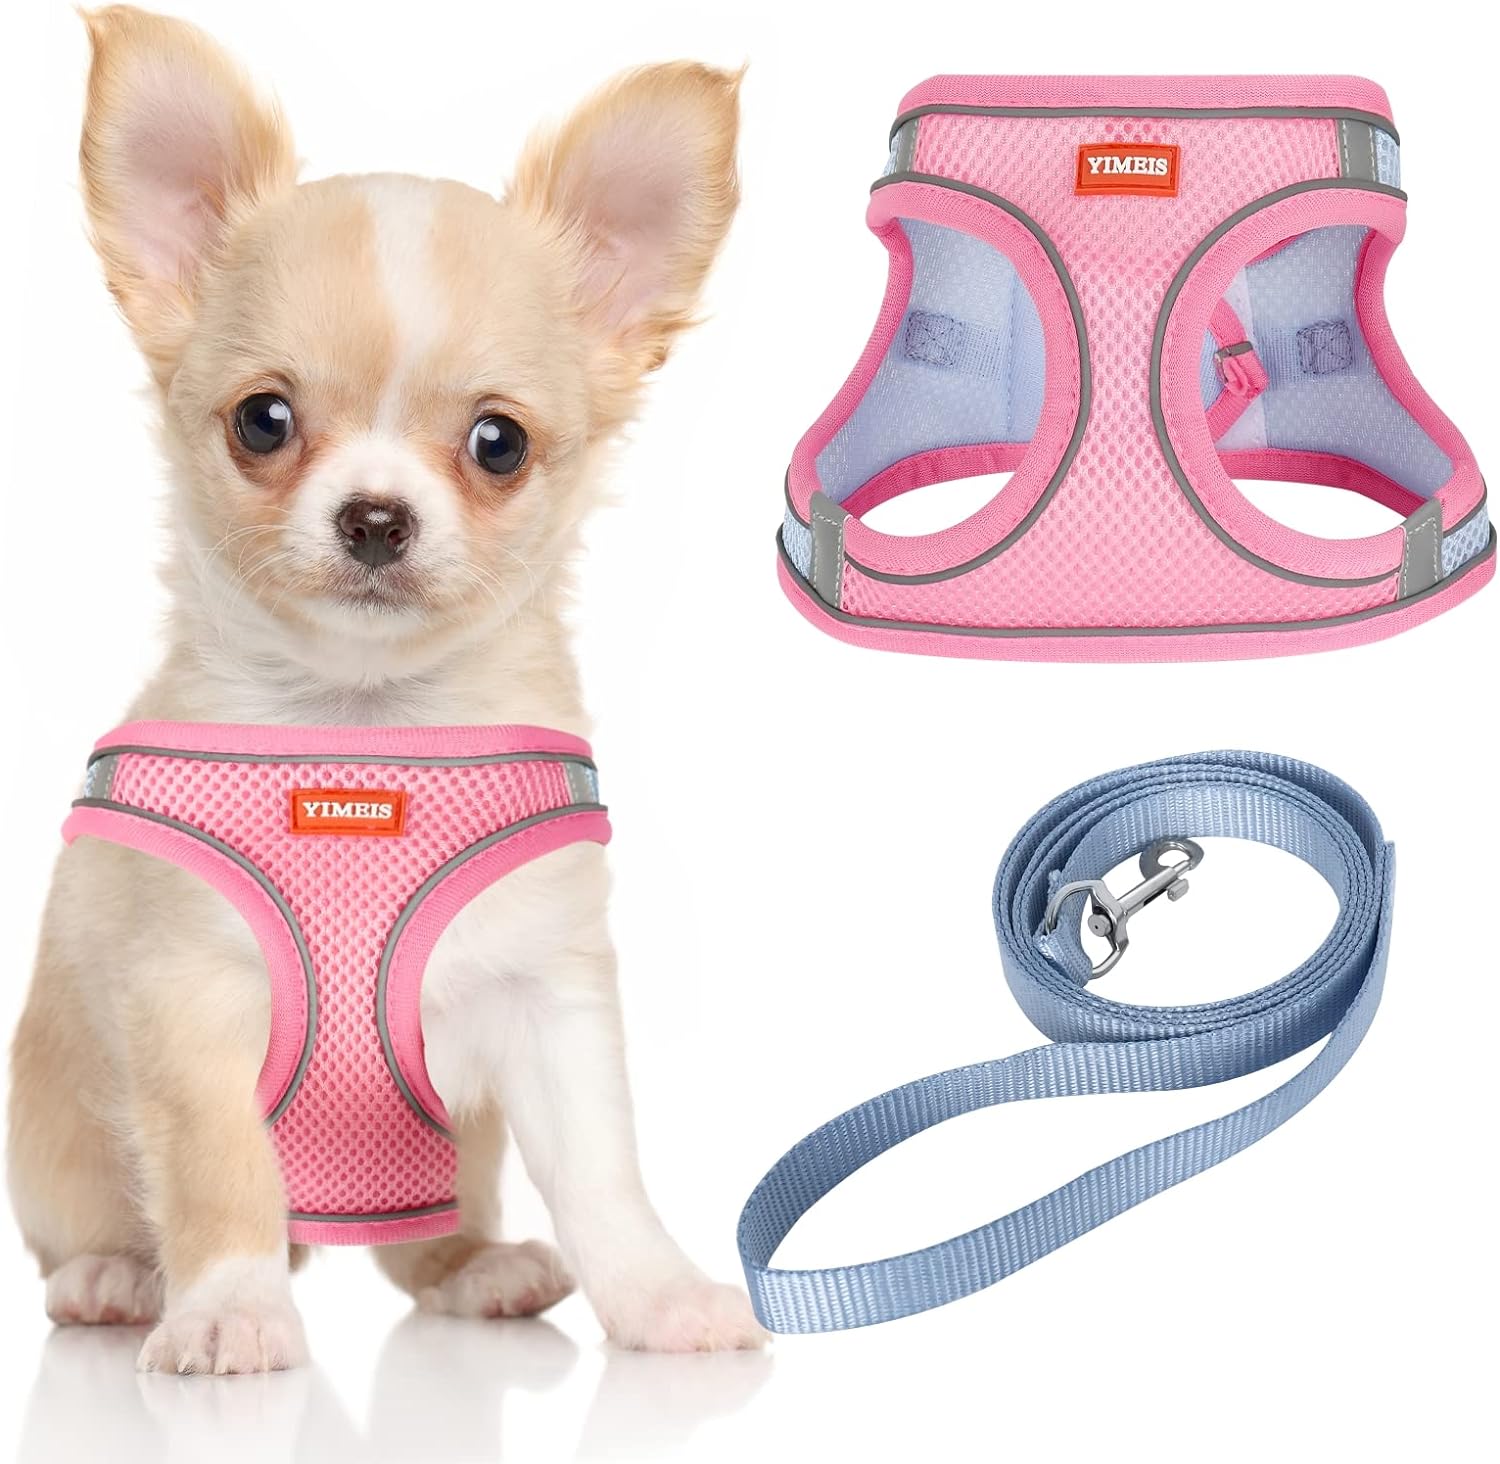 YIMEIS Dog Harness and Leash Set, No Pull Soft Mesh Pet Harness, Reflective Adjustable Puppy Vest for Small Medium Large Dogs, Cats (Pinkblue, Small (Pack of 1)